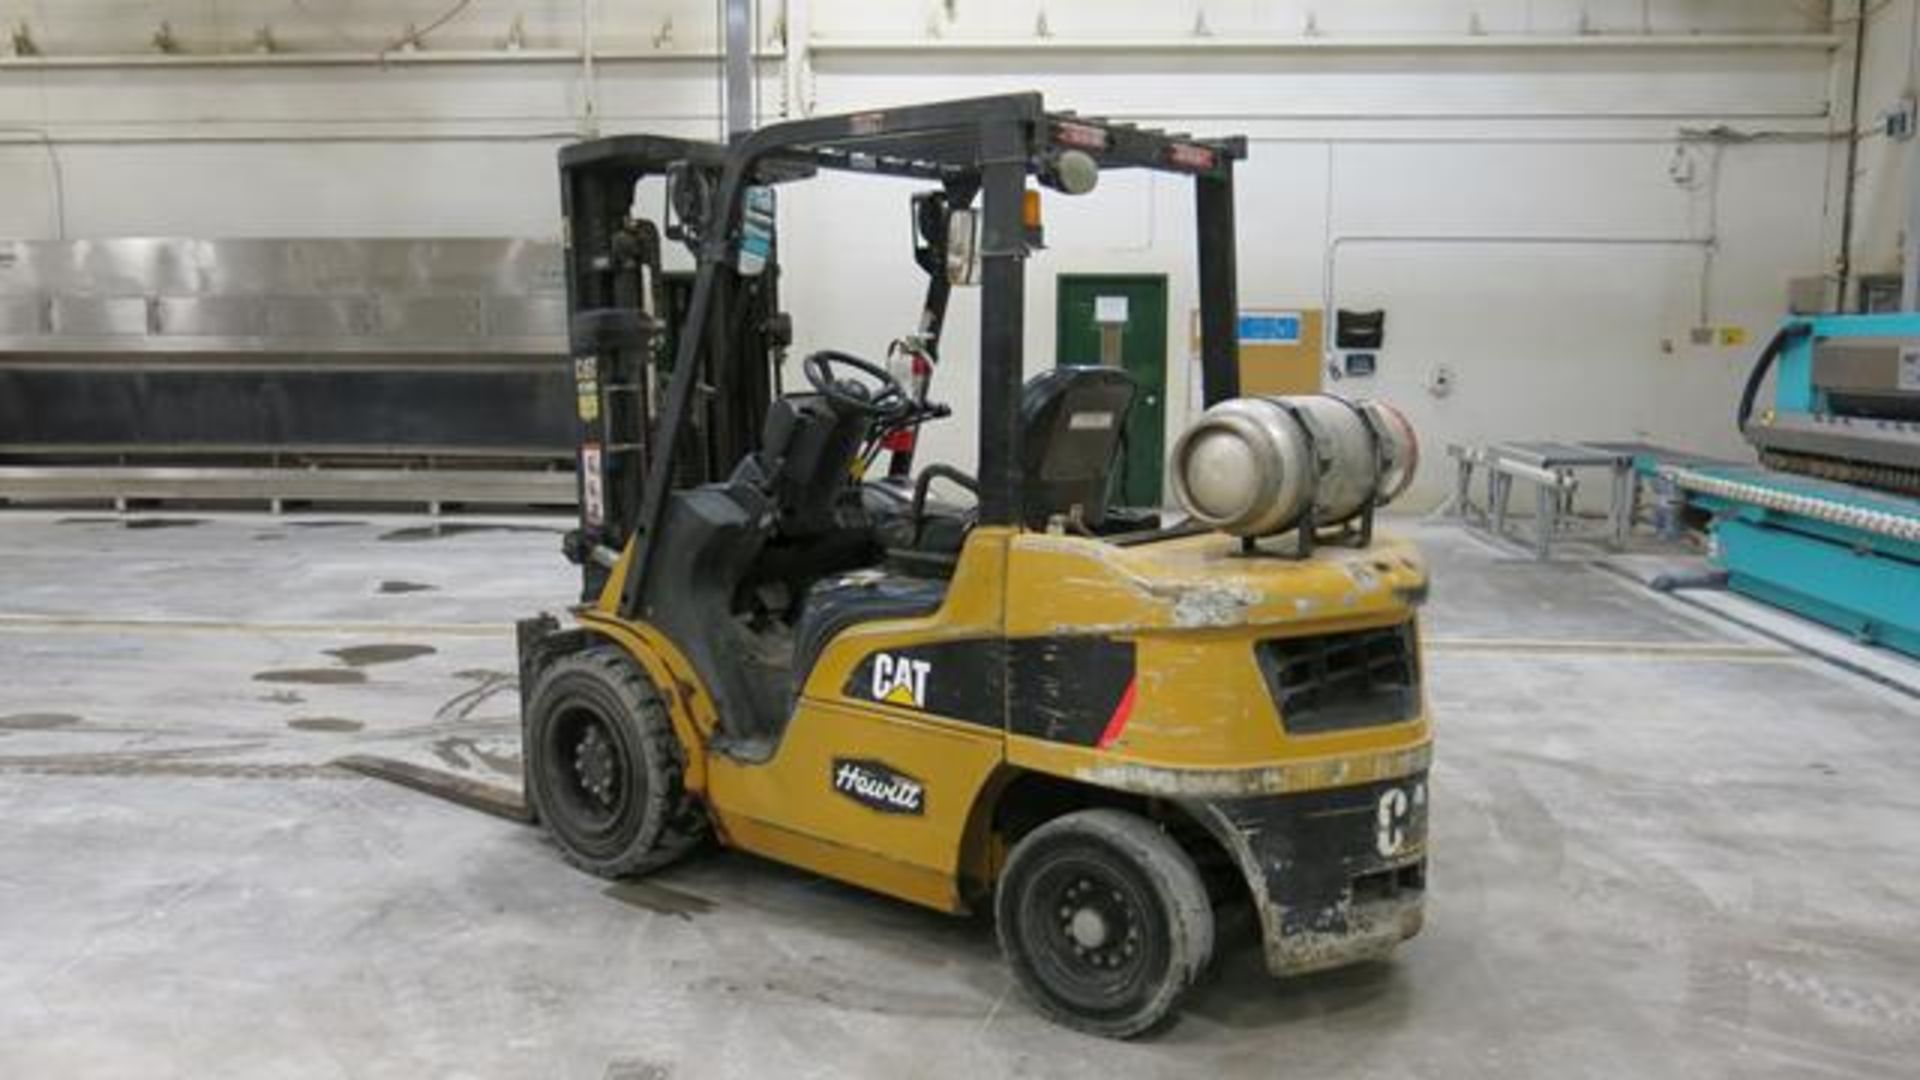 CATERPILLAR, 2P6000, 5,500 LBS., 3 STAGE LPG FORKLIFT WITH SIDESHIFT, 186" MAXIMUM LIFT, S/N - Image 4 of 6